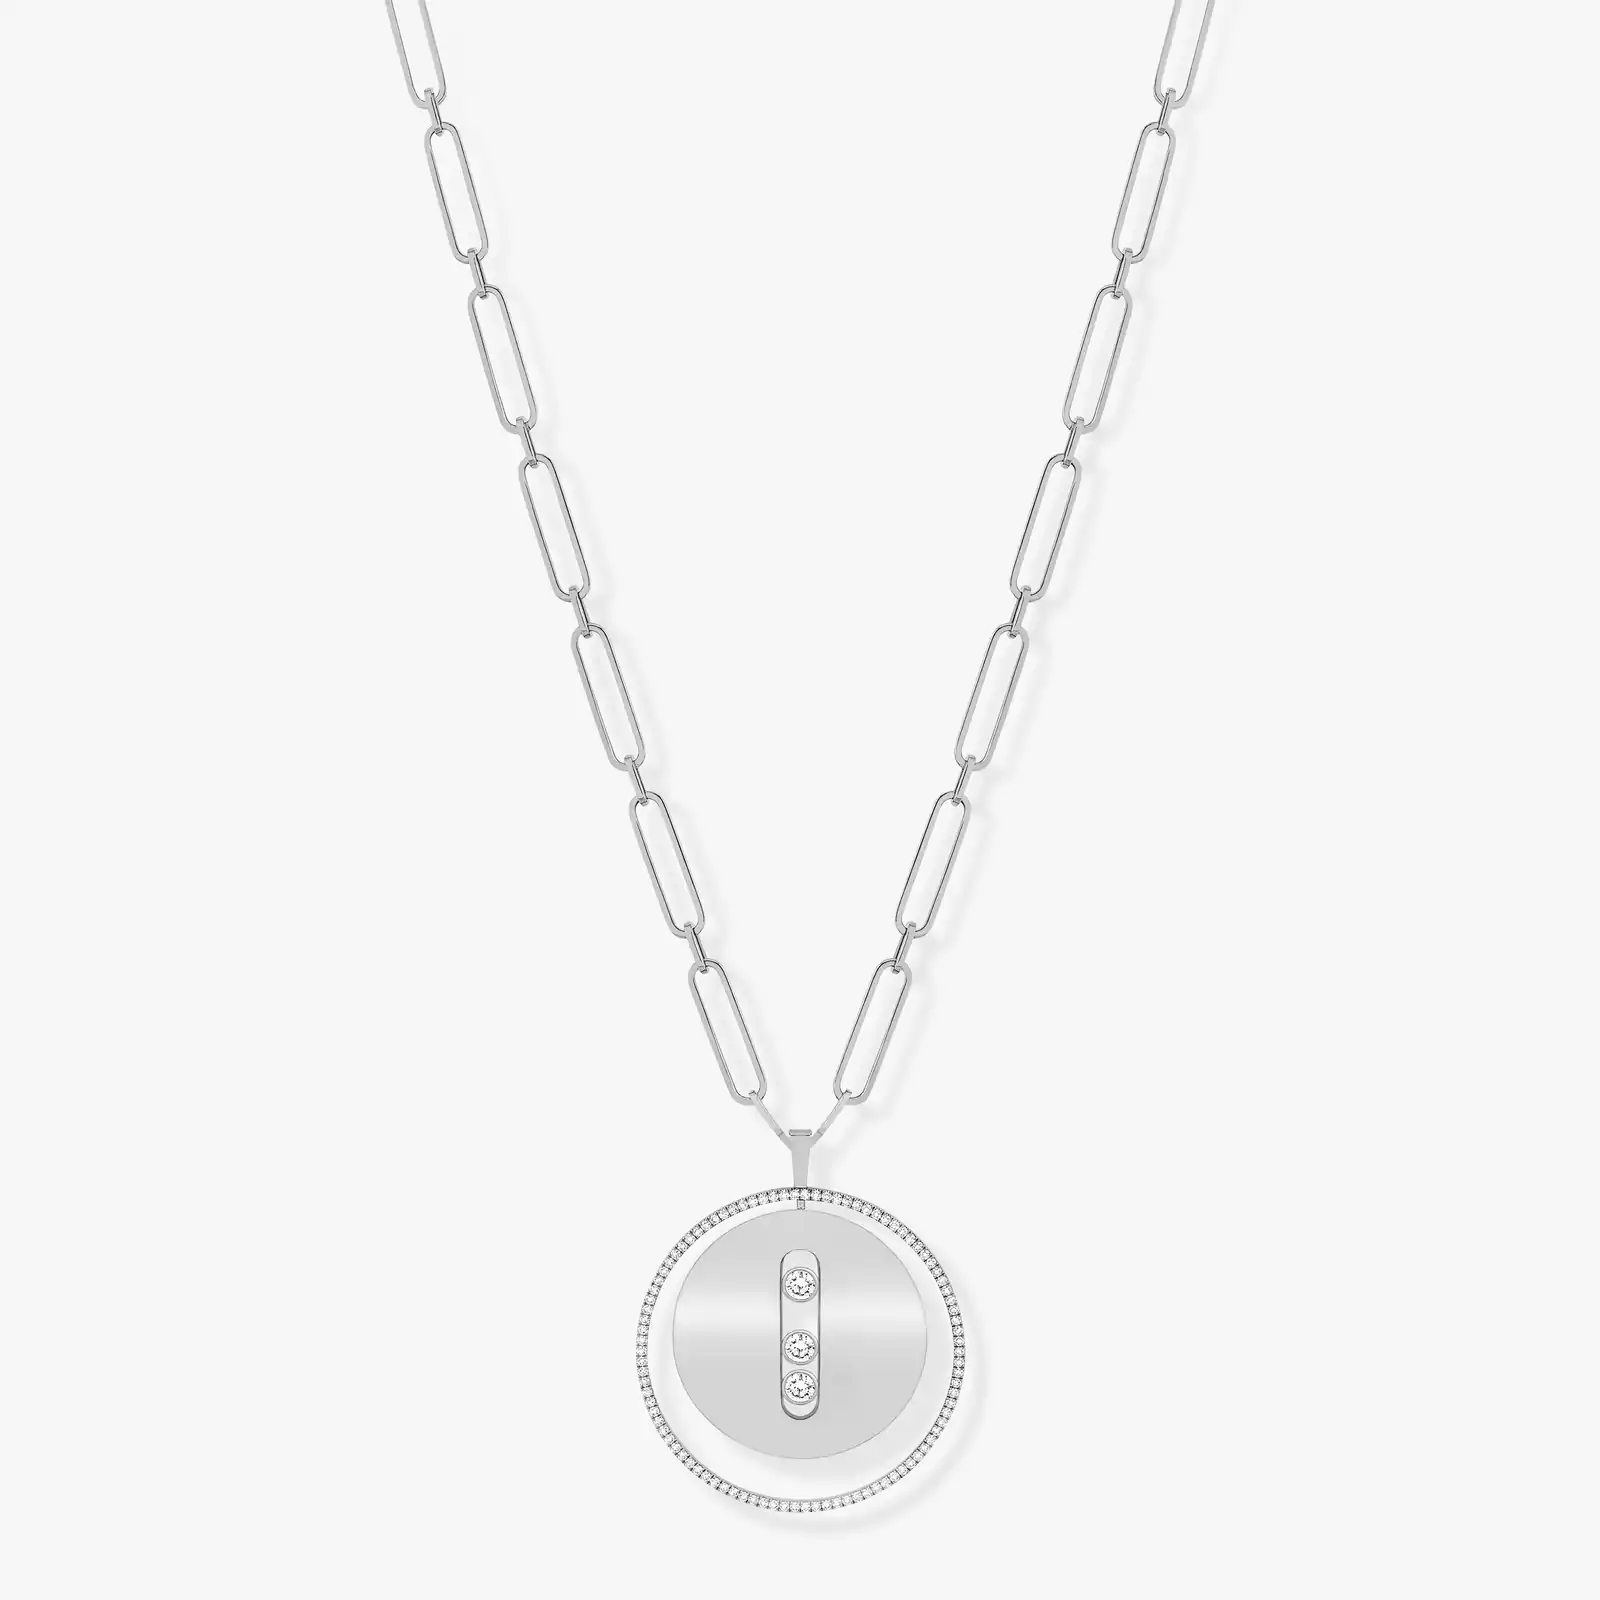 Lucky Move Long Necklace LM White Gold For Her Diamond Necklace 10126-WG